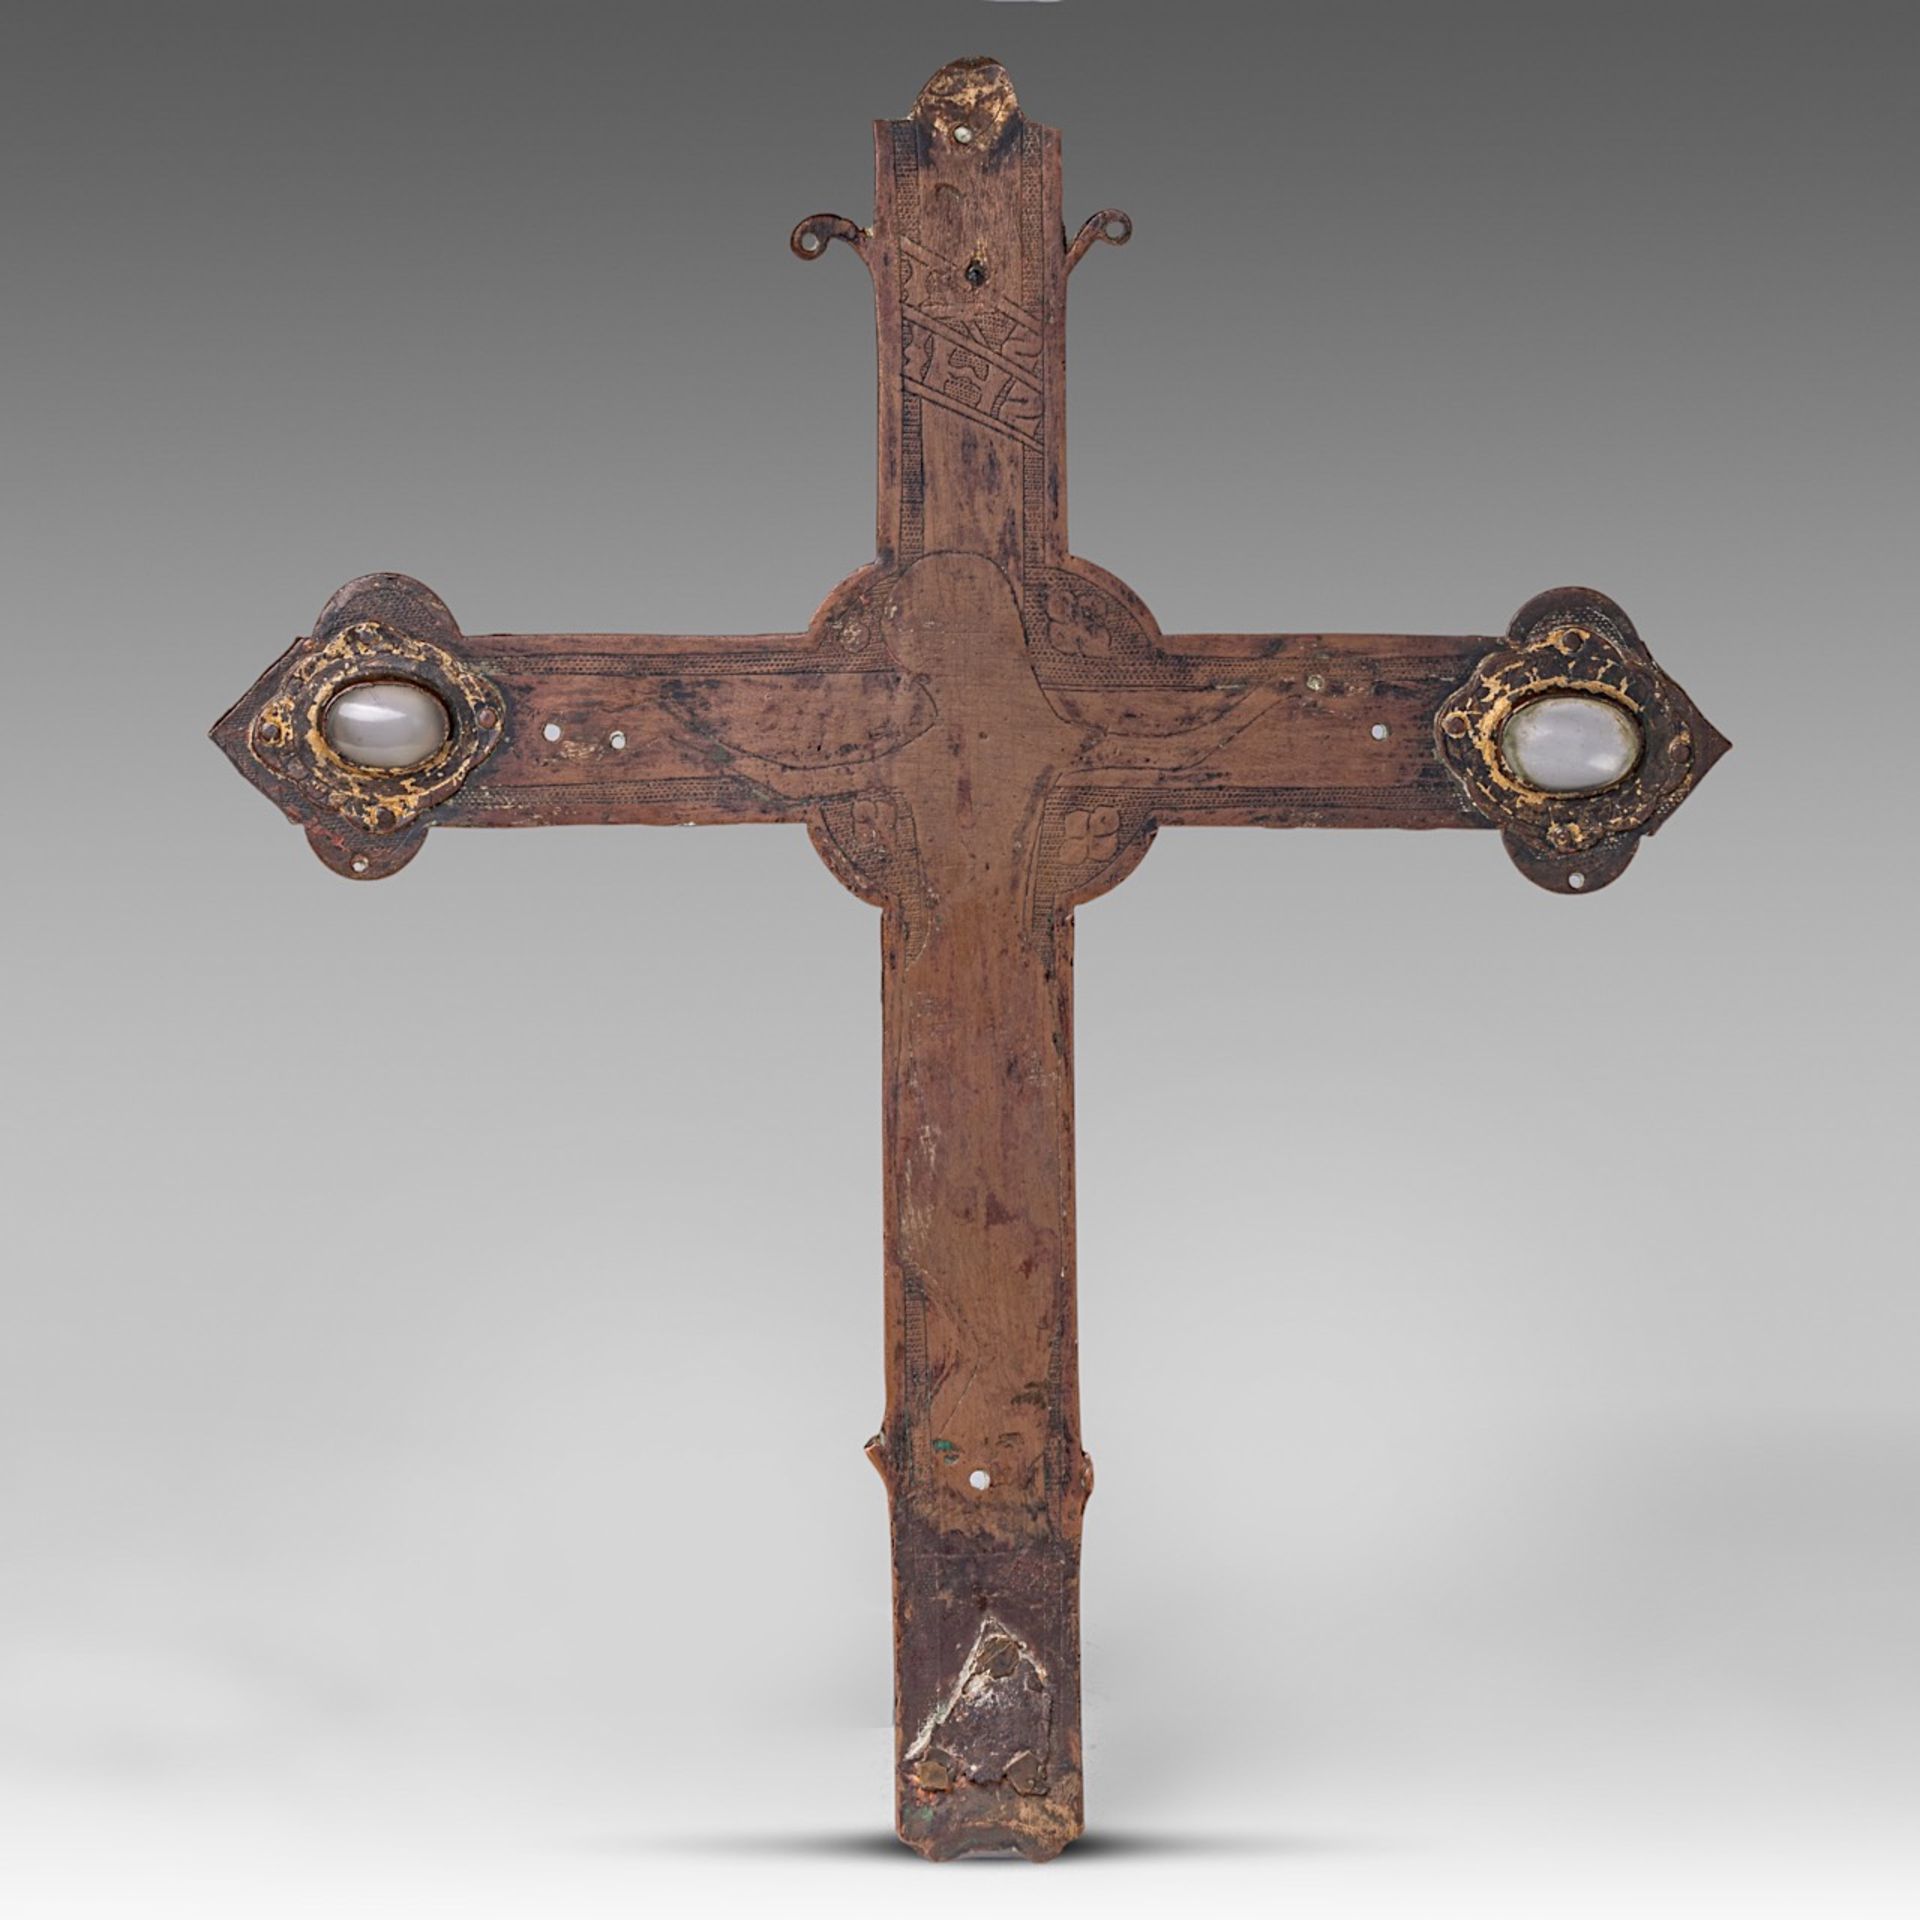 A 14thC copper engraved processional cross, with traces of gilt, H 35,5 cm - Image 5 of 5